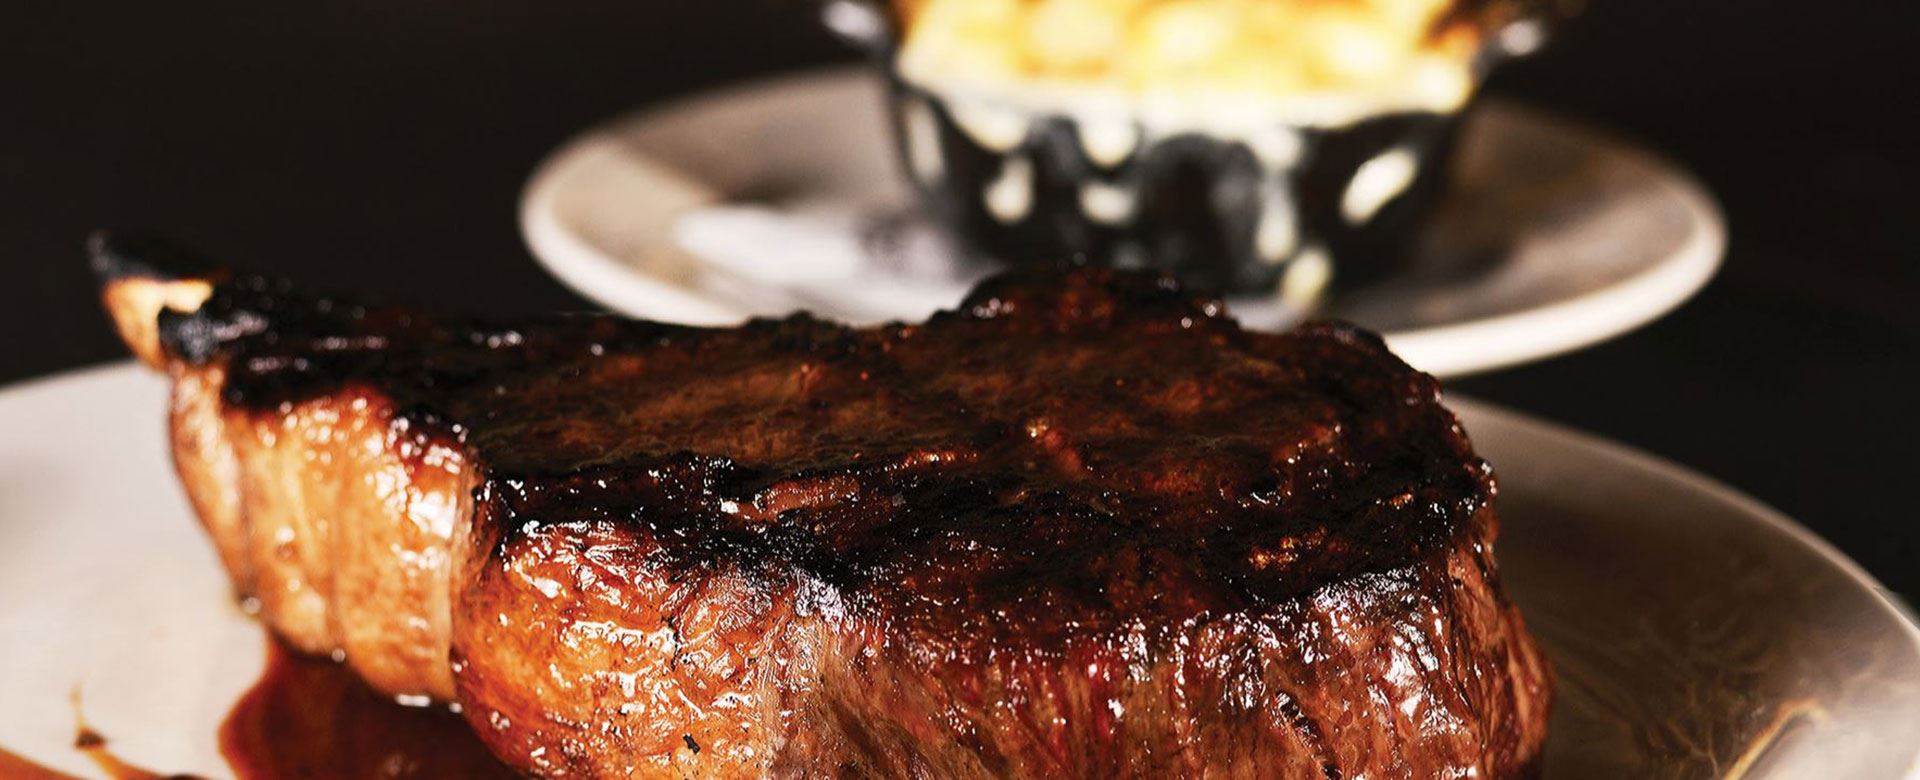 <p class="lead-text">A Legendary Dining Experience</p>
<h2>The Oldest Steakhouse in Florida</h2>
<p>Over 75 Years of Superior Food and Exceptional Services</p>
<span class="fake-button">View Our Menu</span>